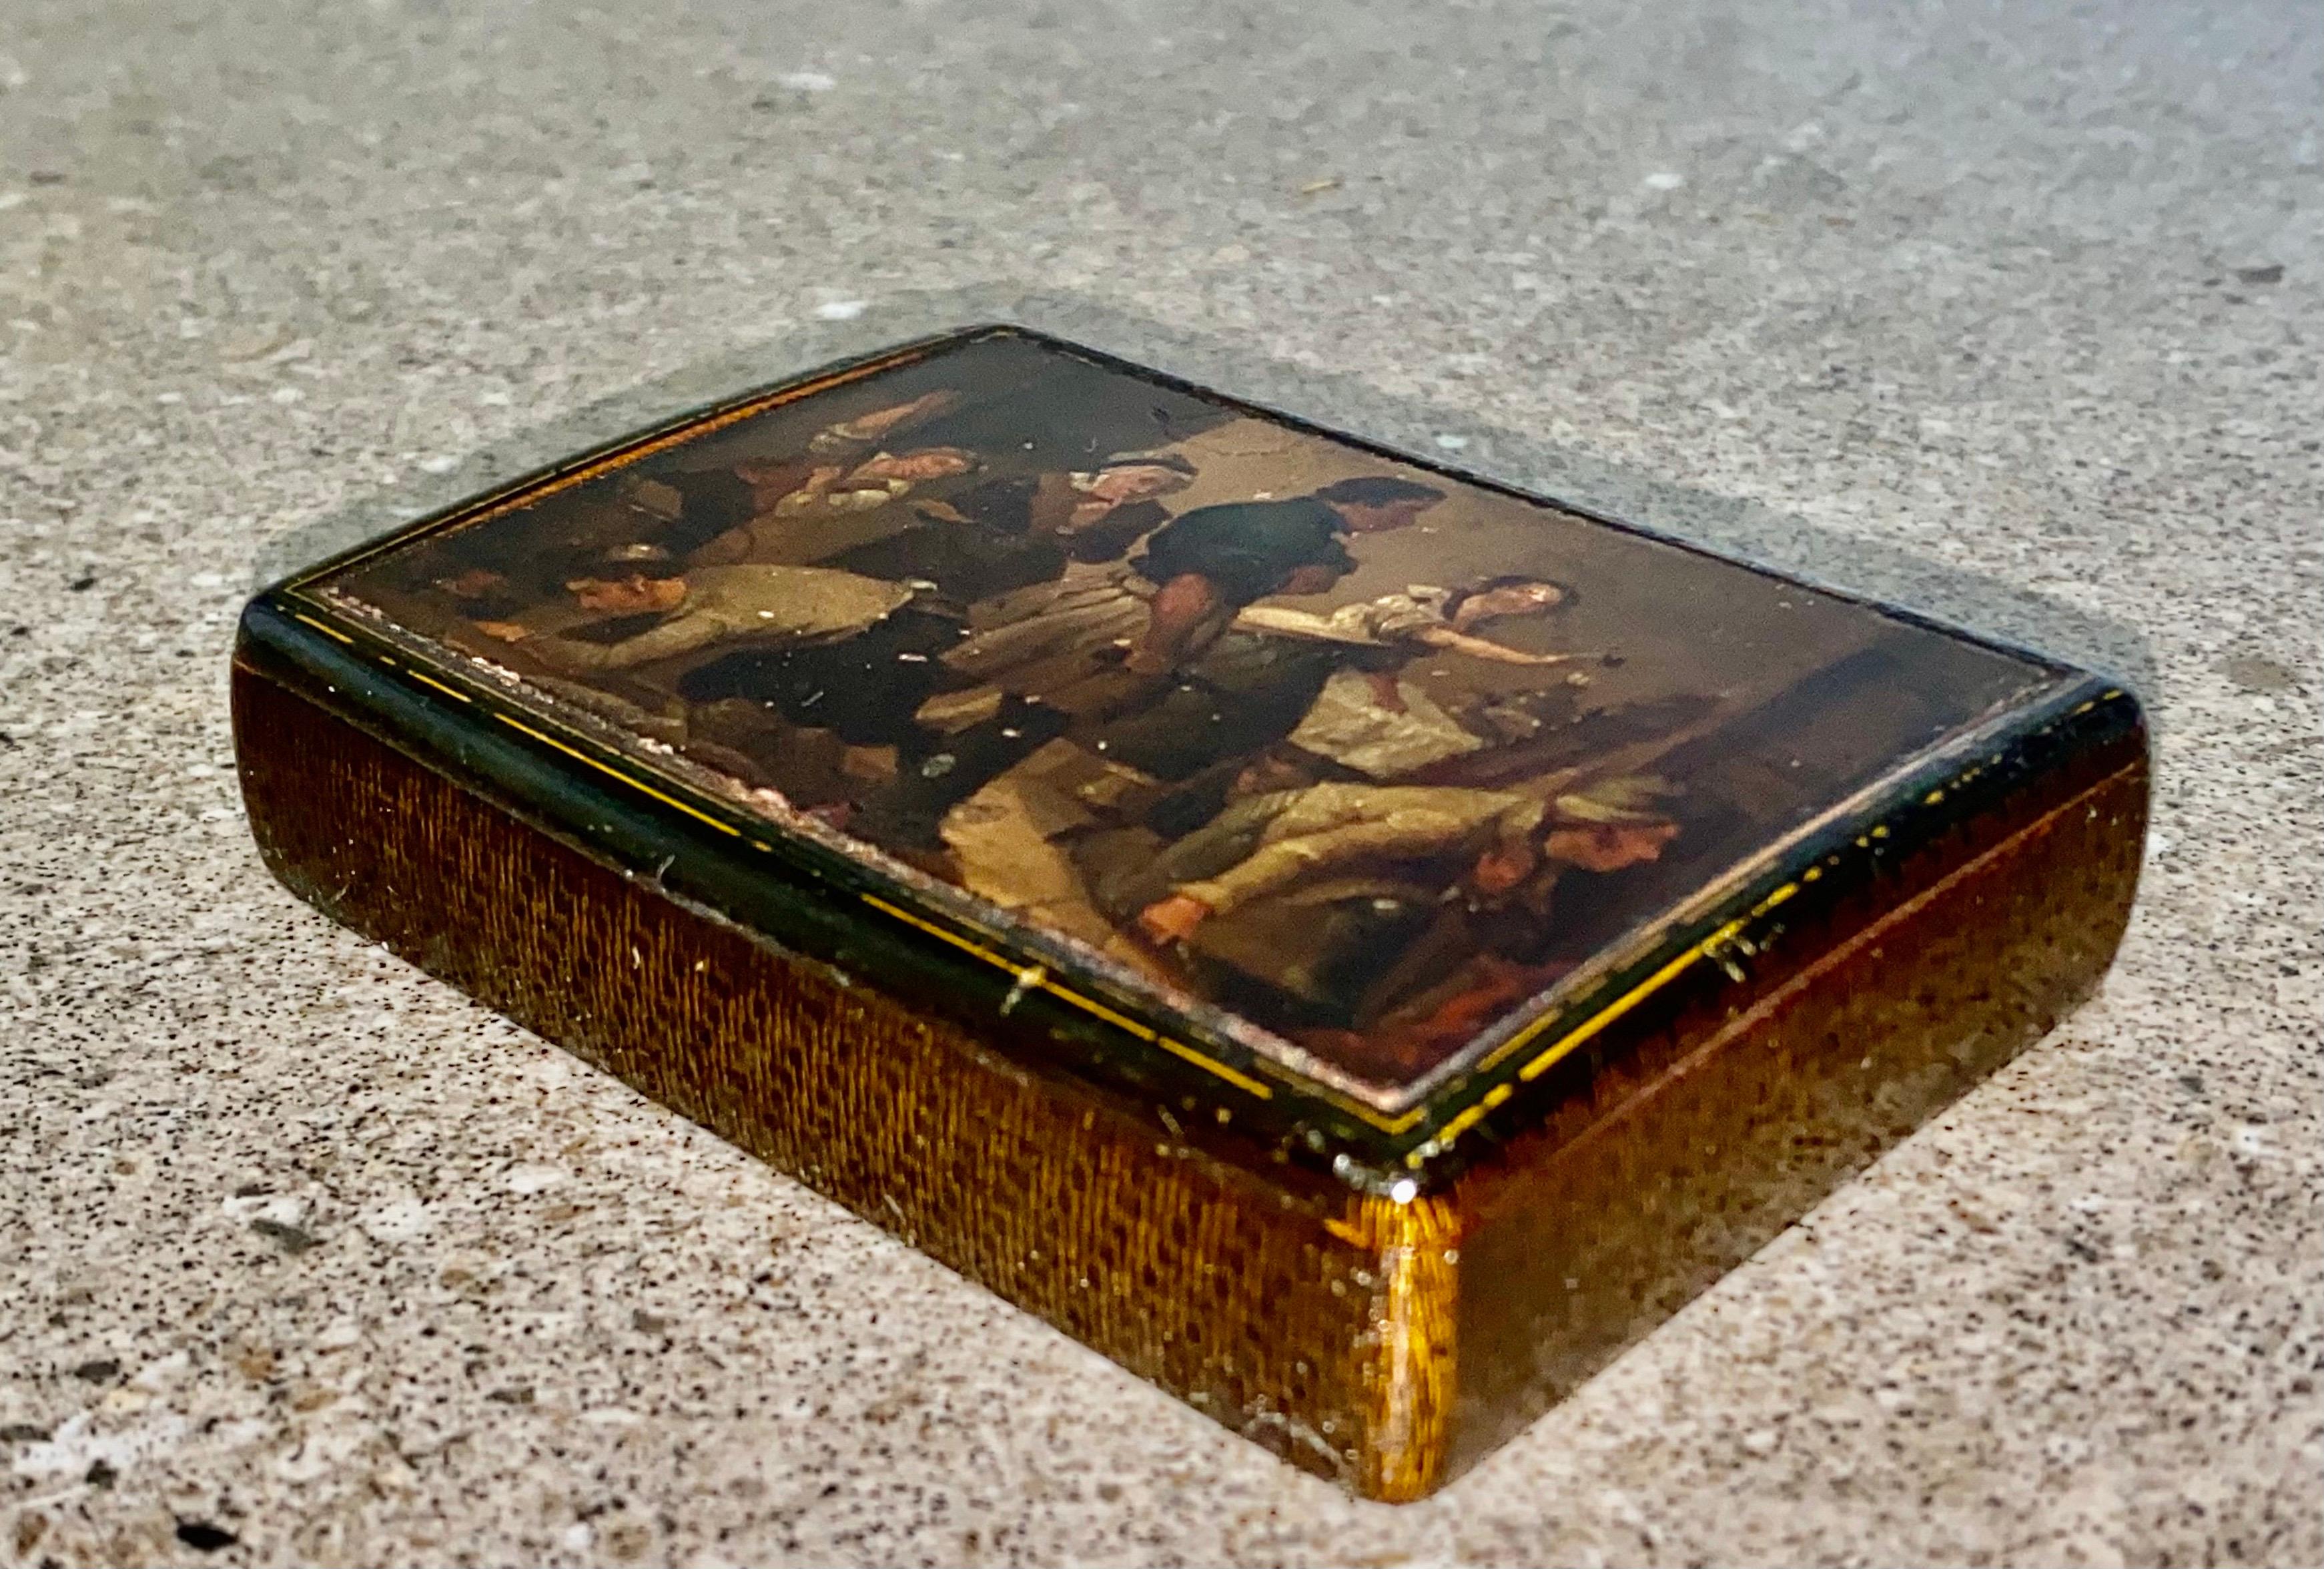 A superb quality large early 19th century rectangular papier mache table snuff box with hand painted interior scene Circa 1800 to 1810. A note inside relating to the original owner.
Overall in very good condition with some light crazing but no